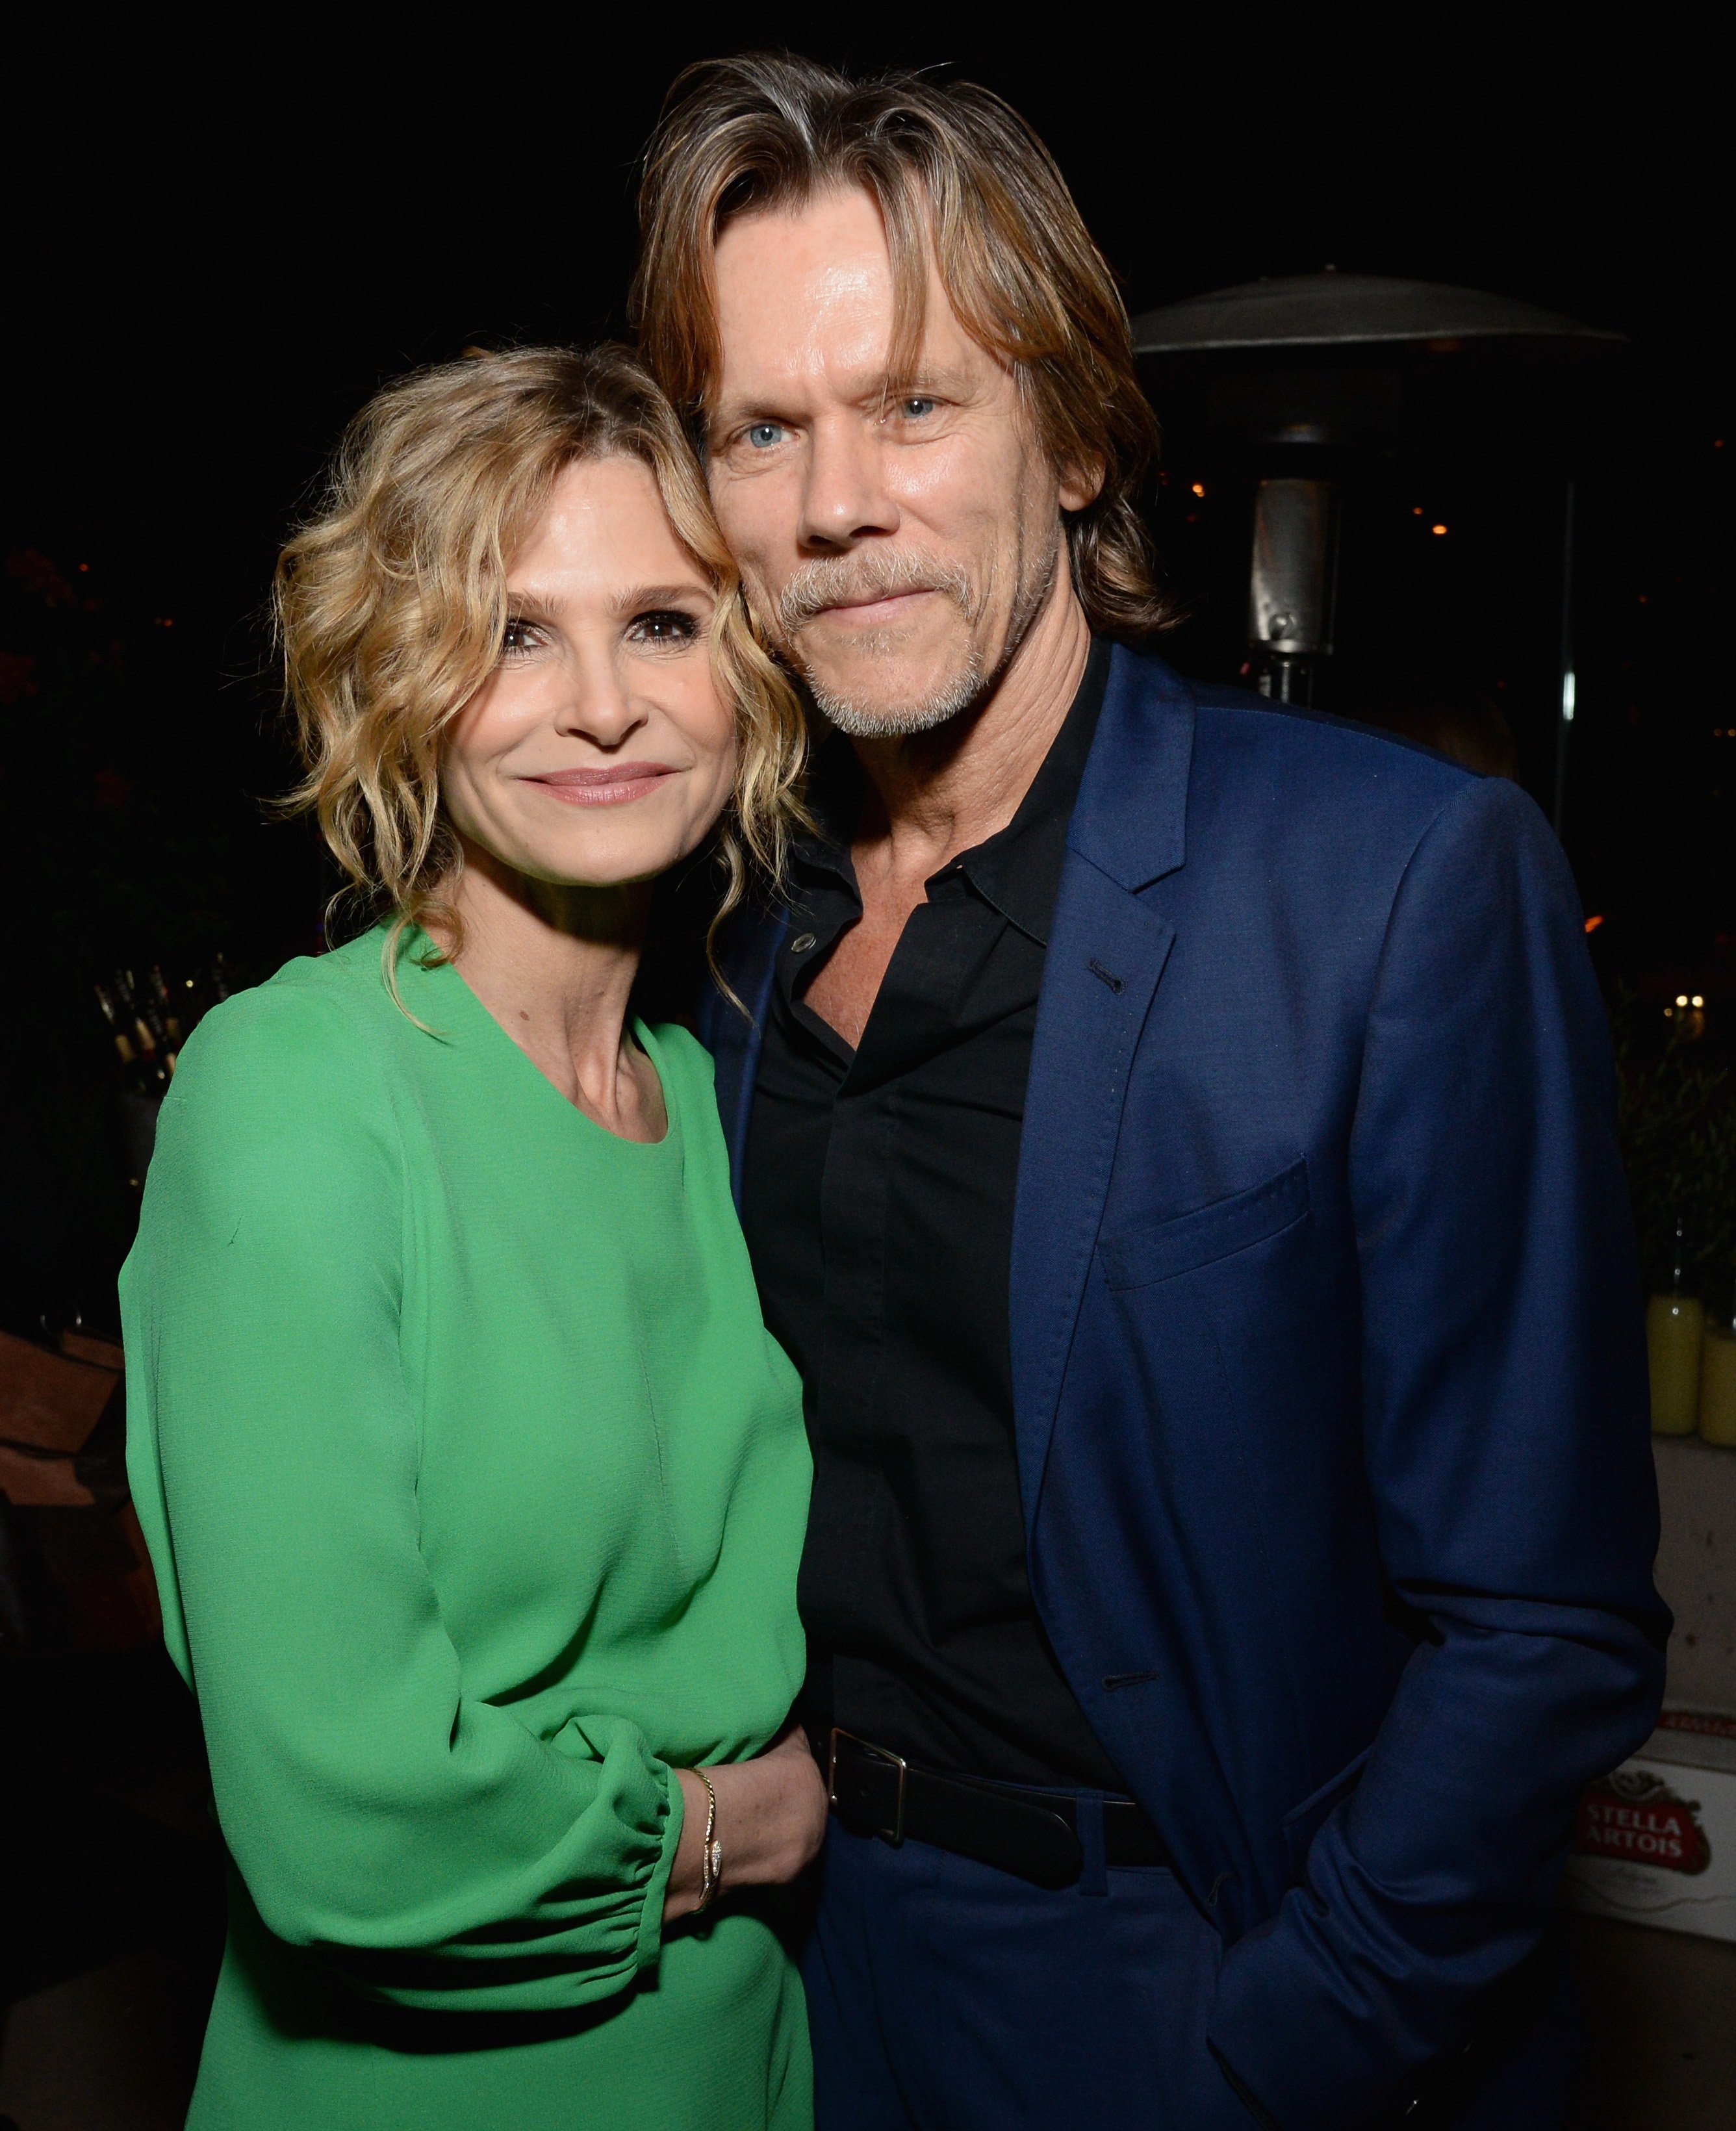 Kyra Sedgwick (L) and Kevin Bacon at Moet Celebrates The 75th Anniversary of The Golden Globes Award Season at Catch LA on November 15, 2017 in West Hollywood, California. | Source: Getty Images